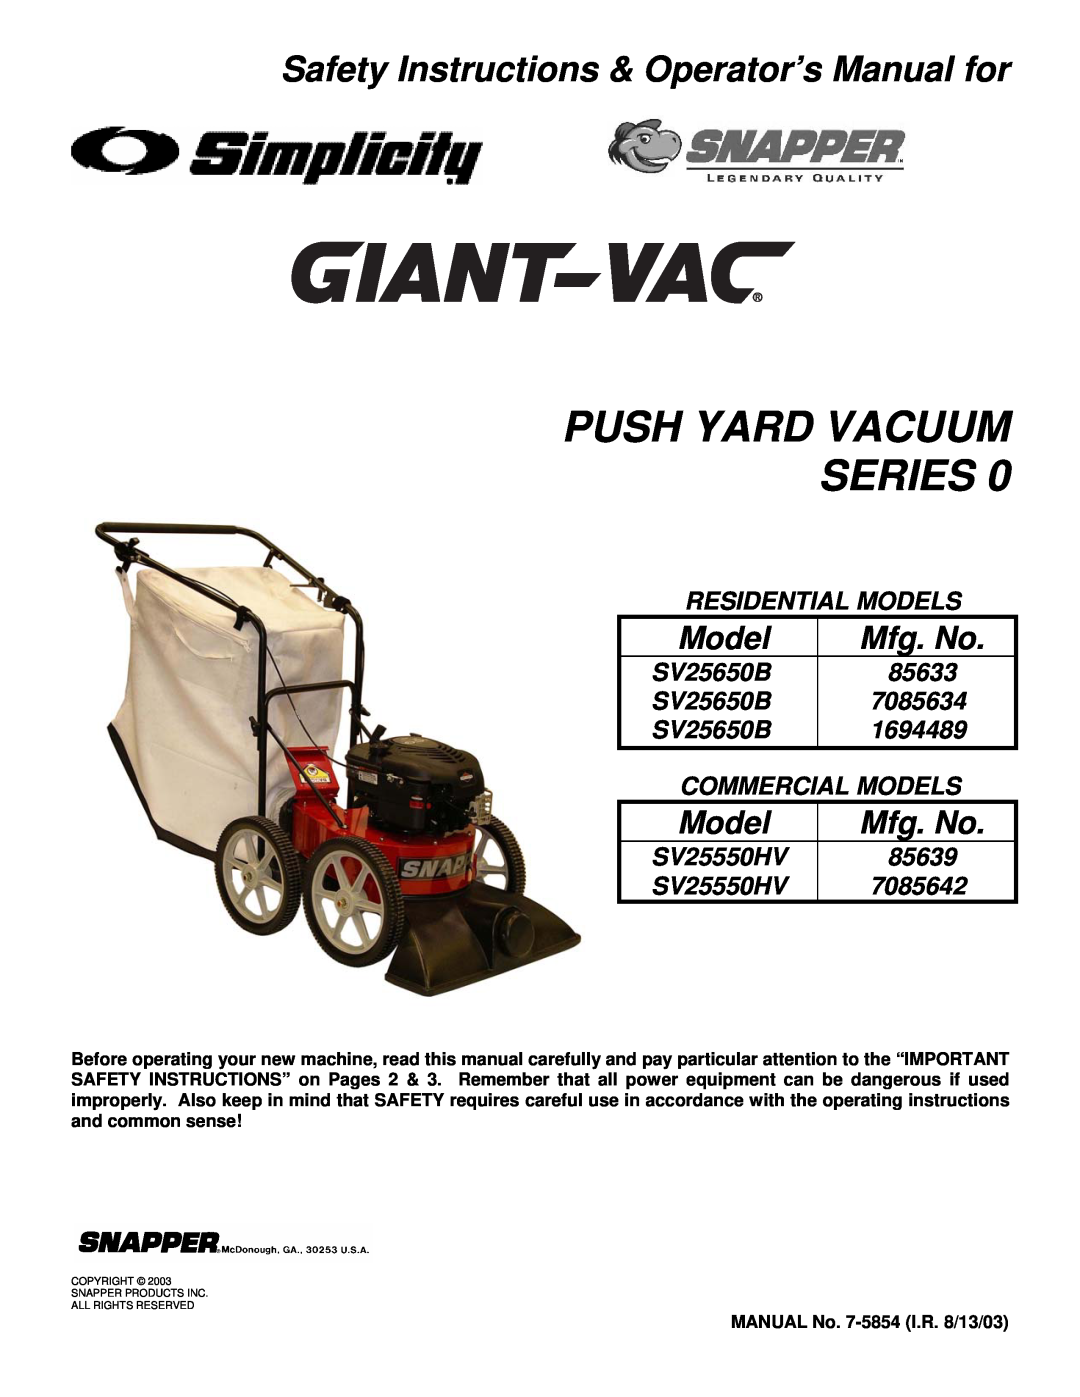 Snapper SV25650B important safety instructions Safety Instructions & Operator’s Manual for, Push Yard Vacuum Series, Model 